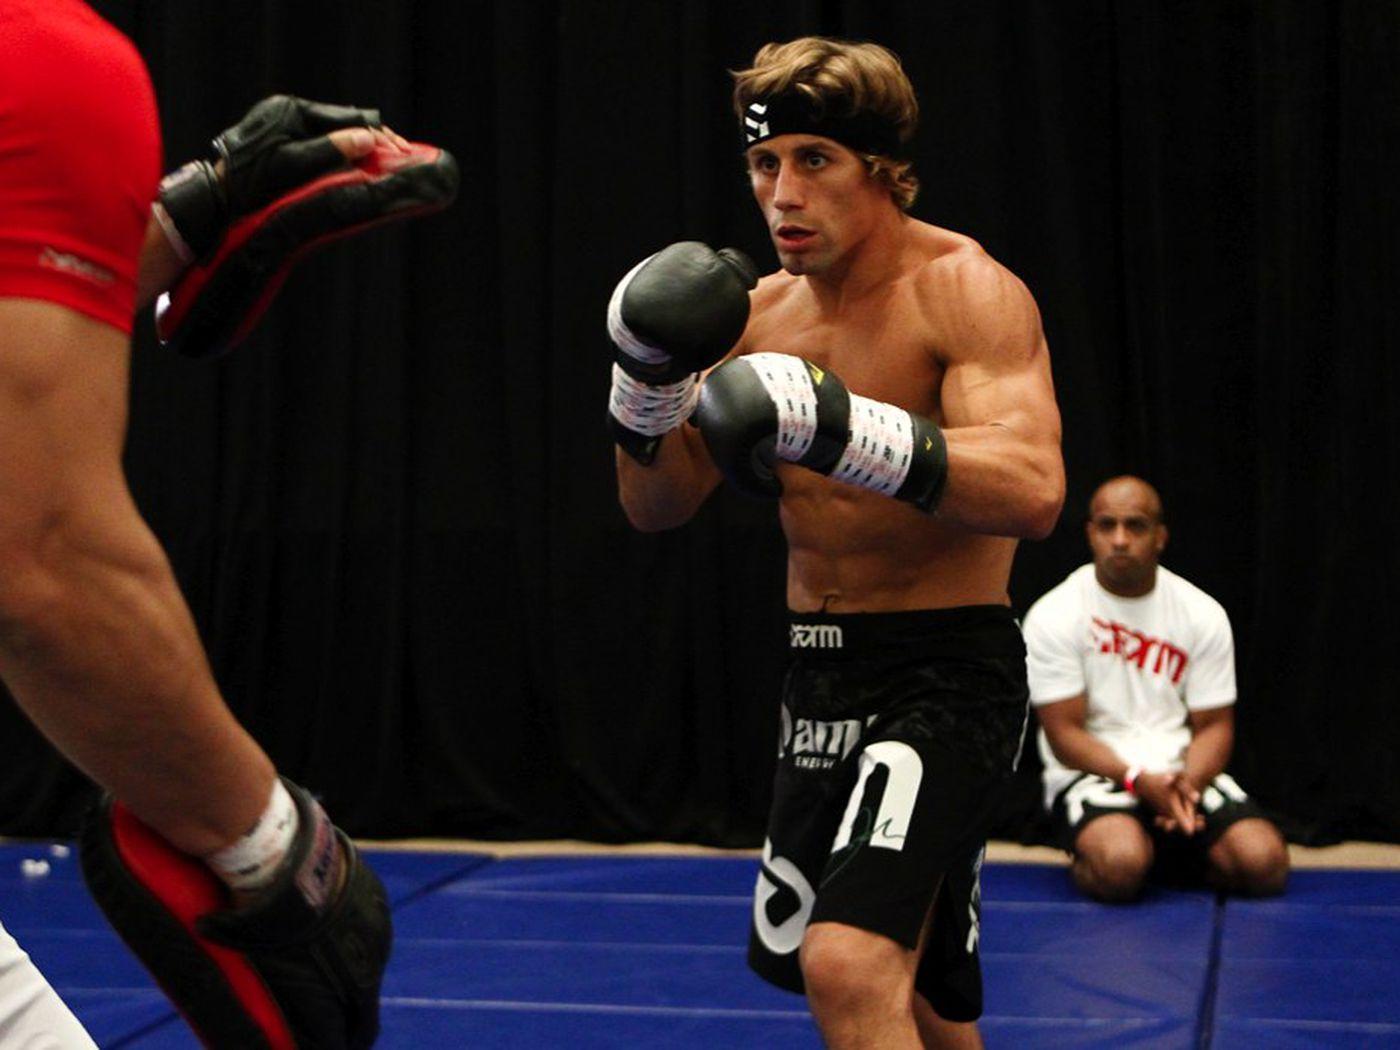 Urijah Faber reveals explosive new allegations in Duane Ludwig feud